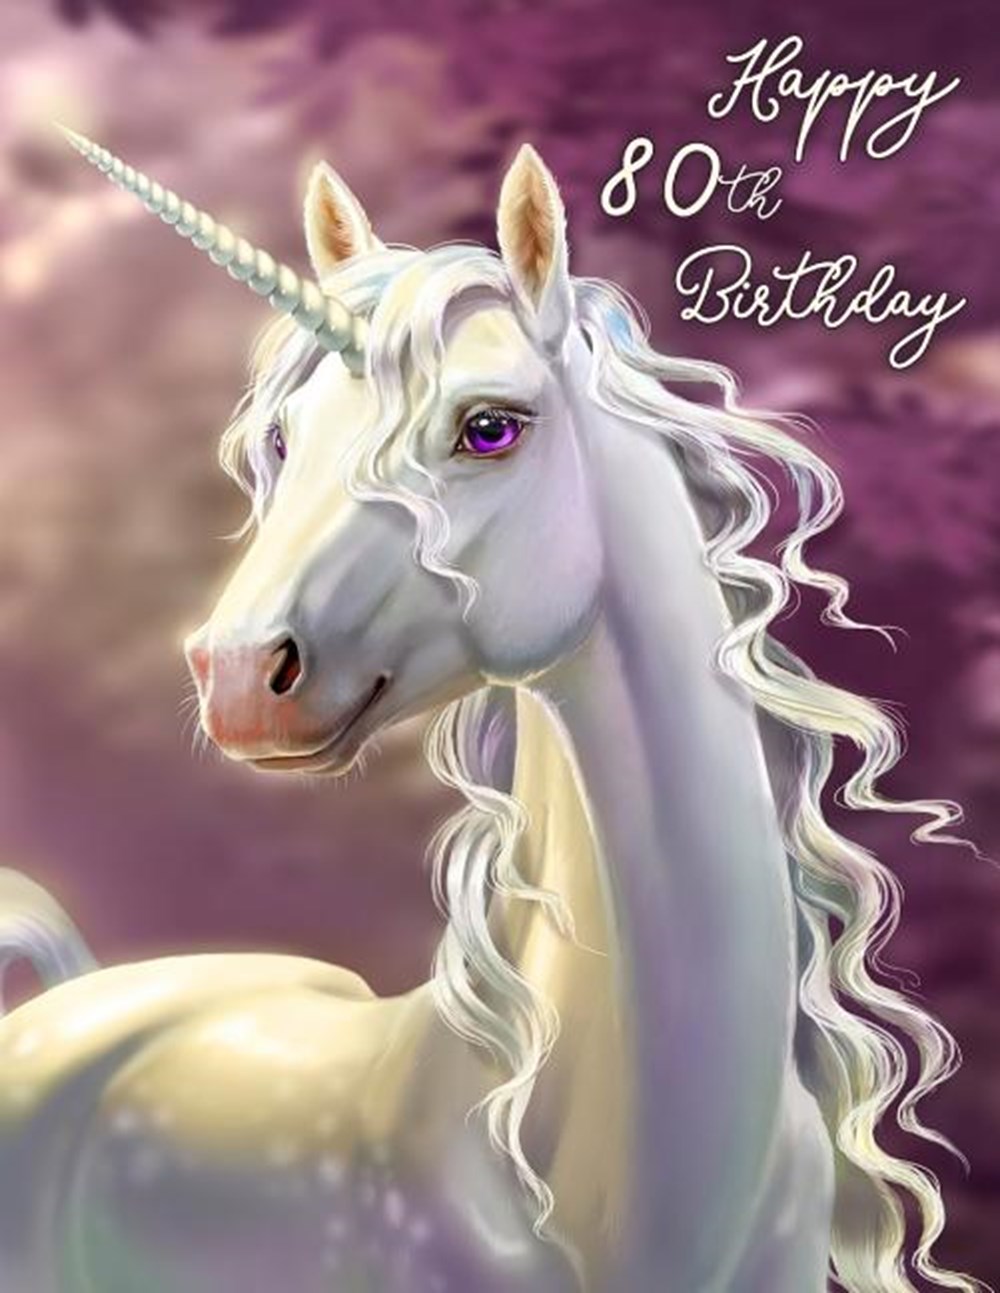 Happy 80th Birthday: Large Print Address Book with Pretty Unicorn Design. Forget the Birthday Card a